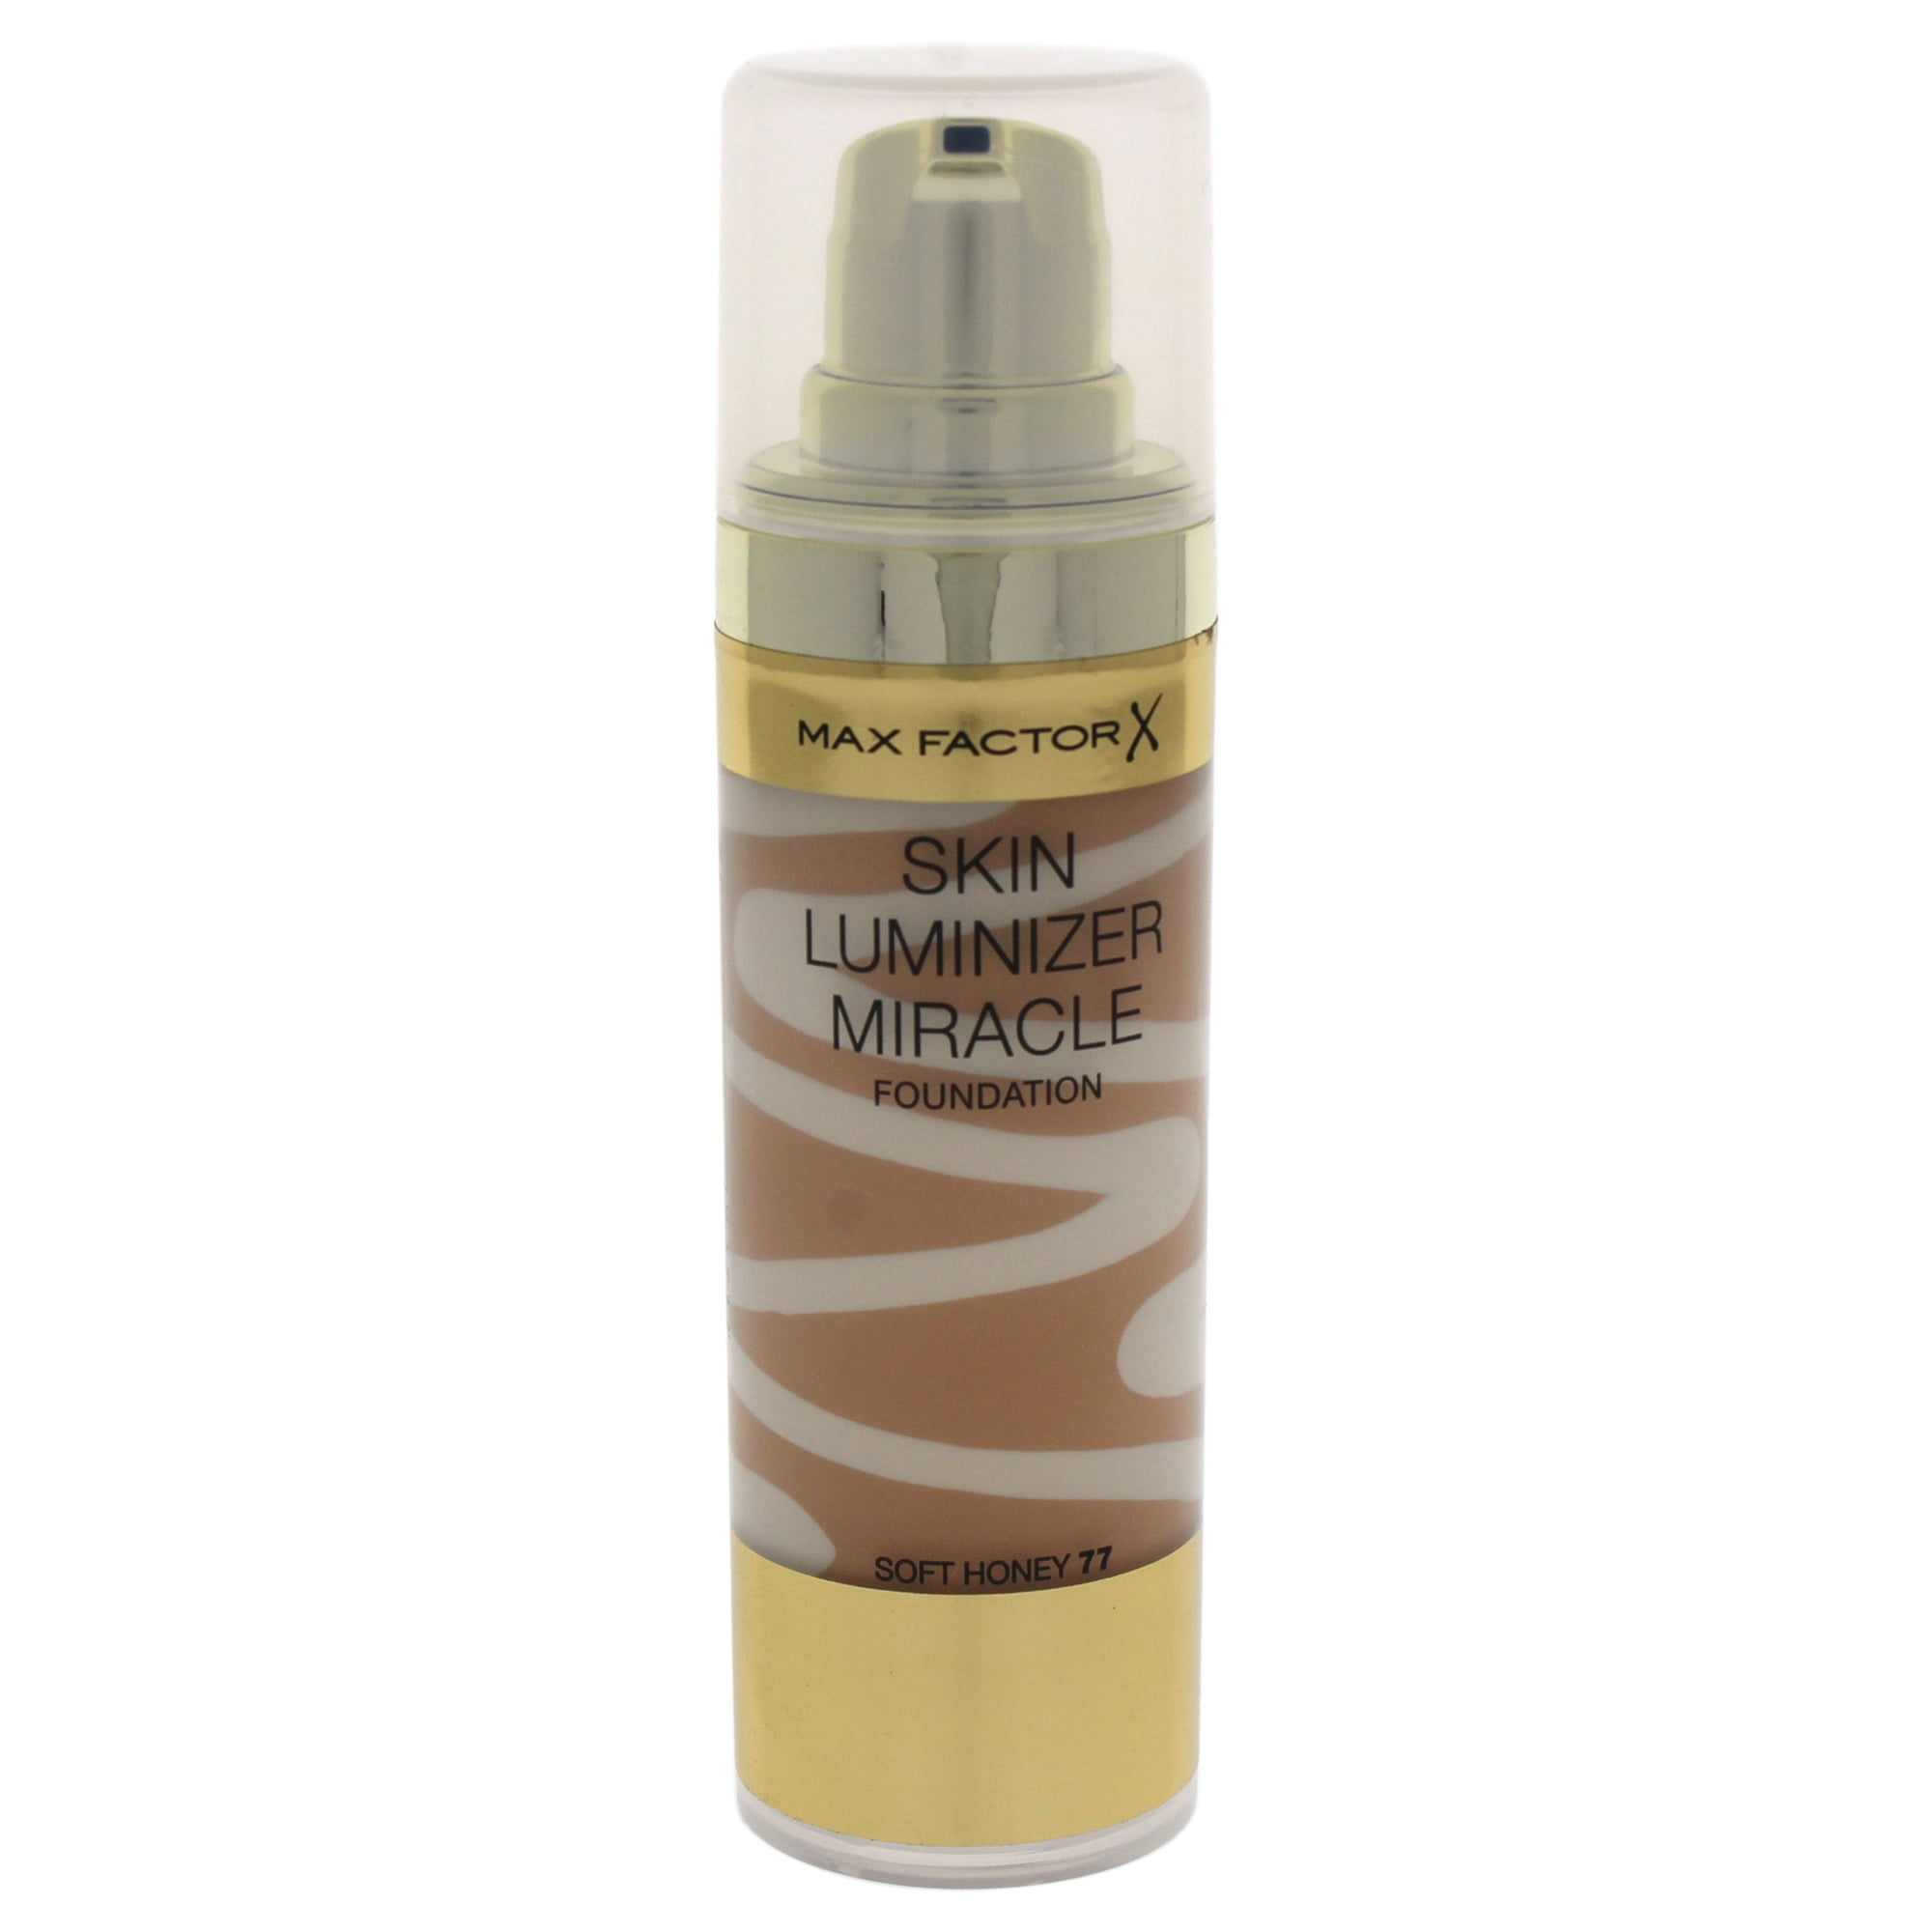 for - - Factor # Honey Max Luminizer Miracle Foundation Women 77 oz 1 Skin by Soft Foundation